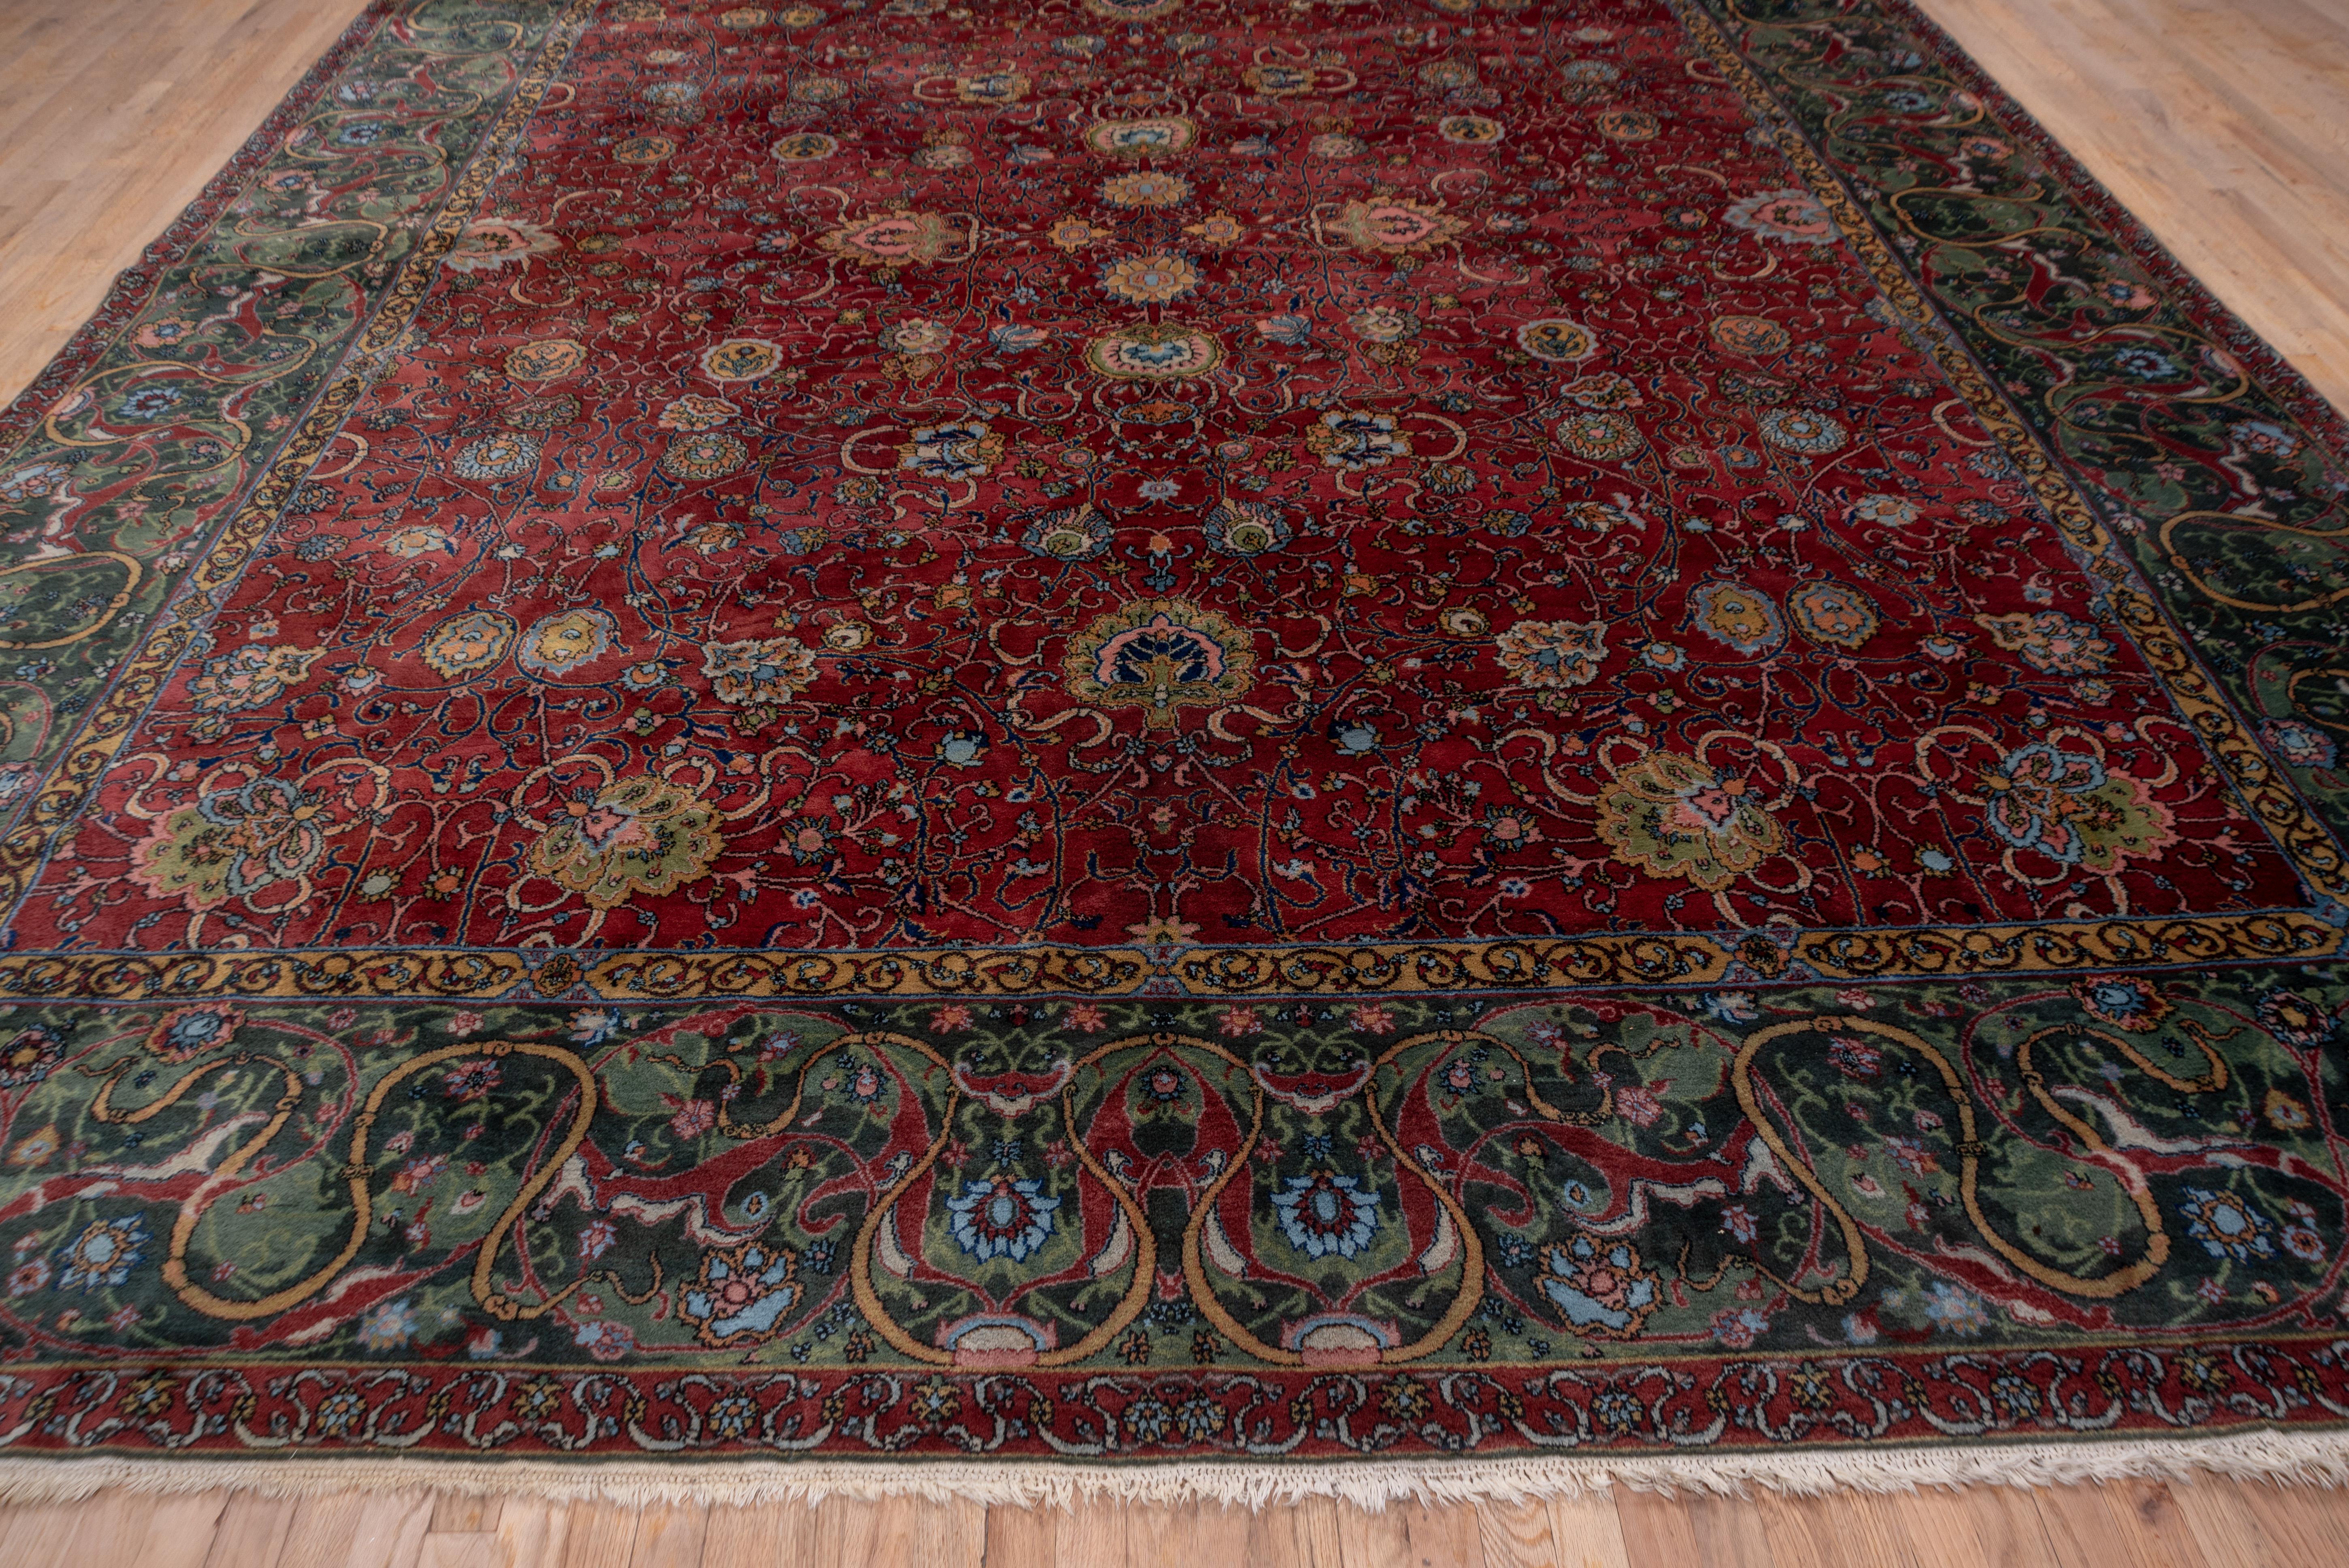 1920s Antique Indian Lahore Rug, Burgundy All-Over Field, Dark Green Borders In Good Condition For Sale In New York, NY